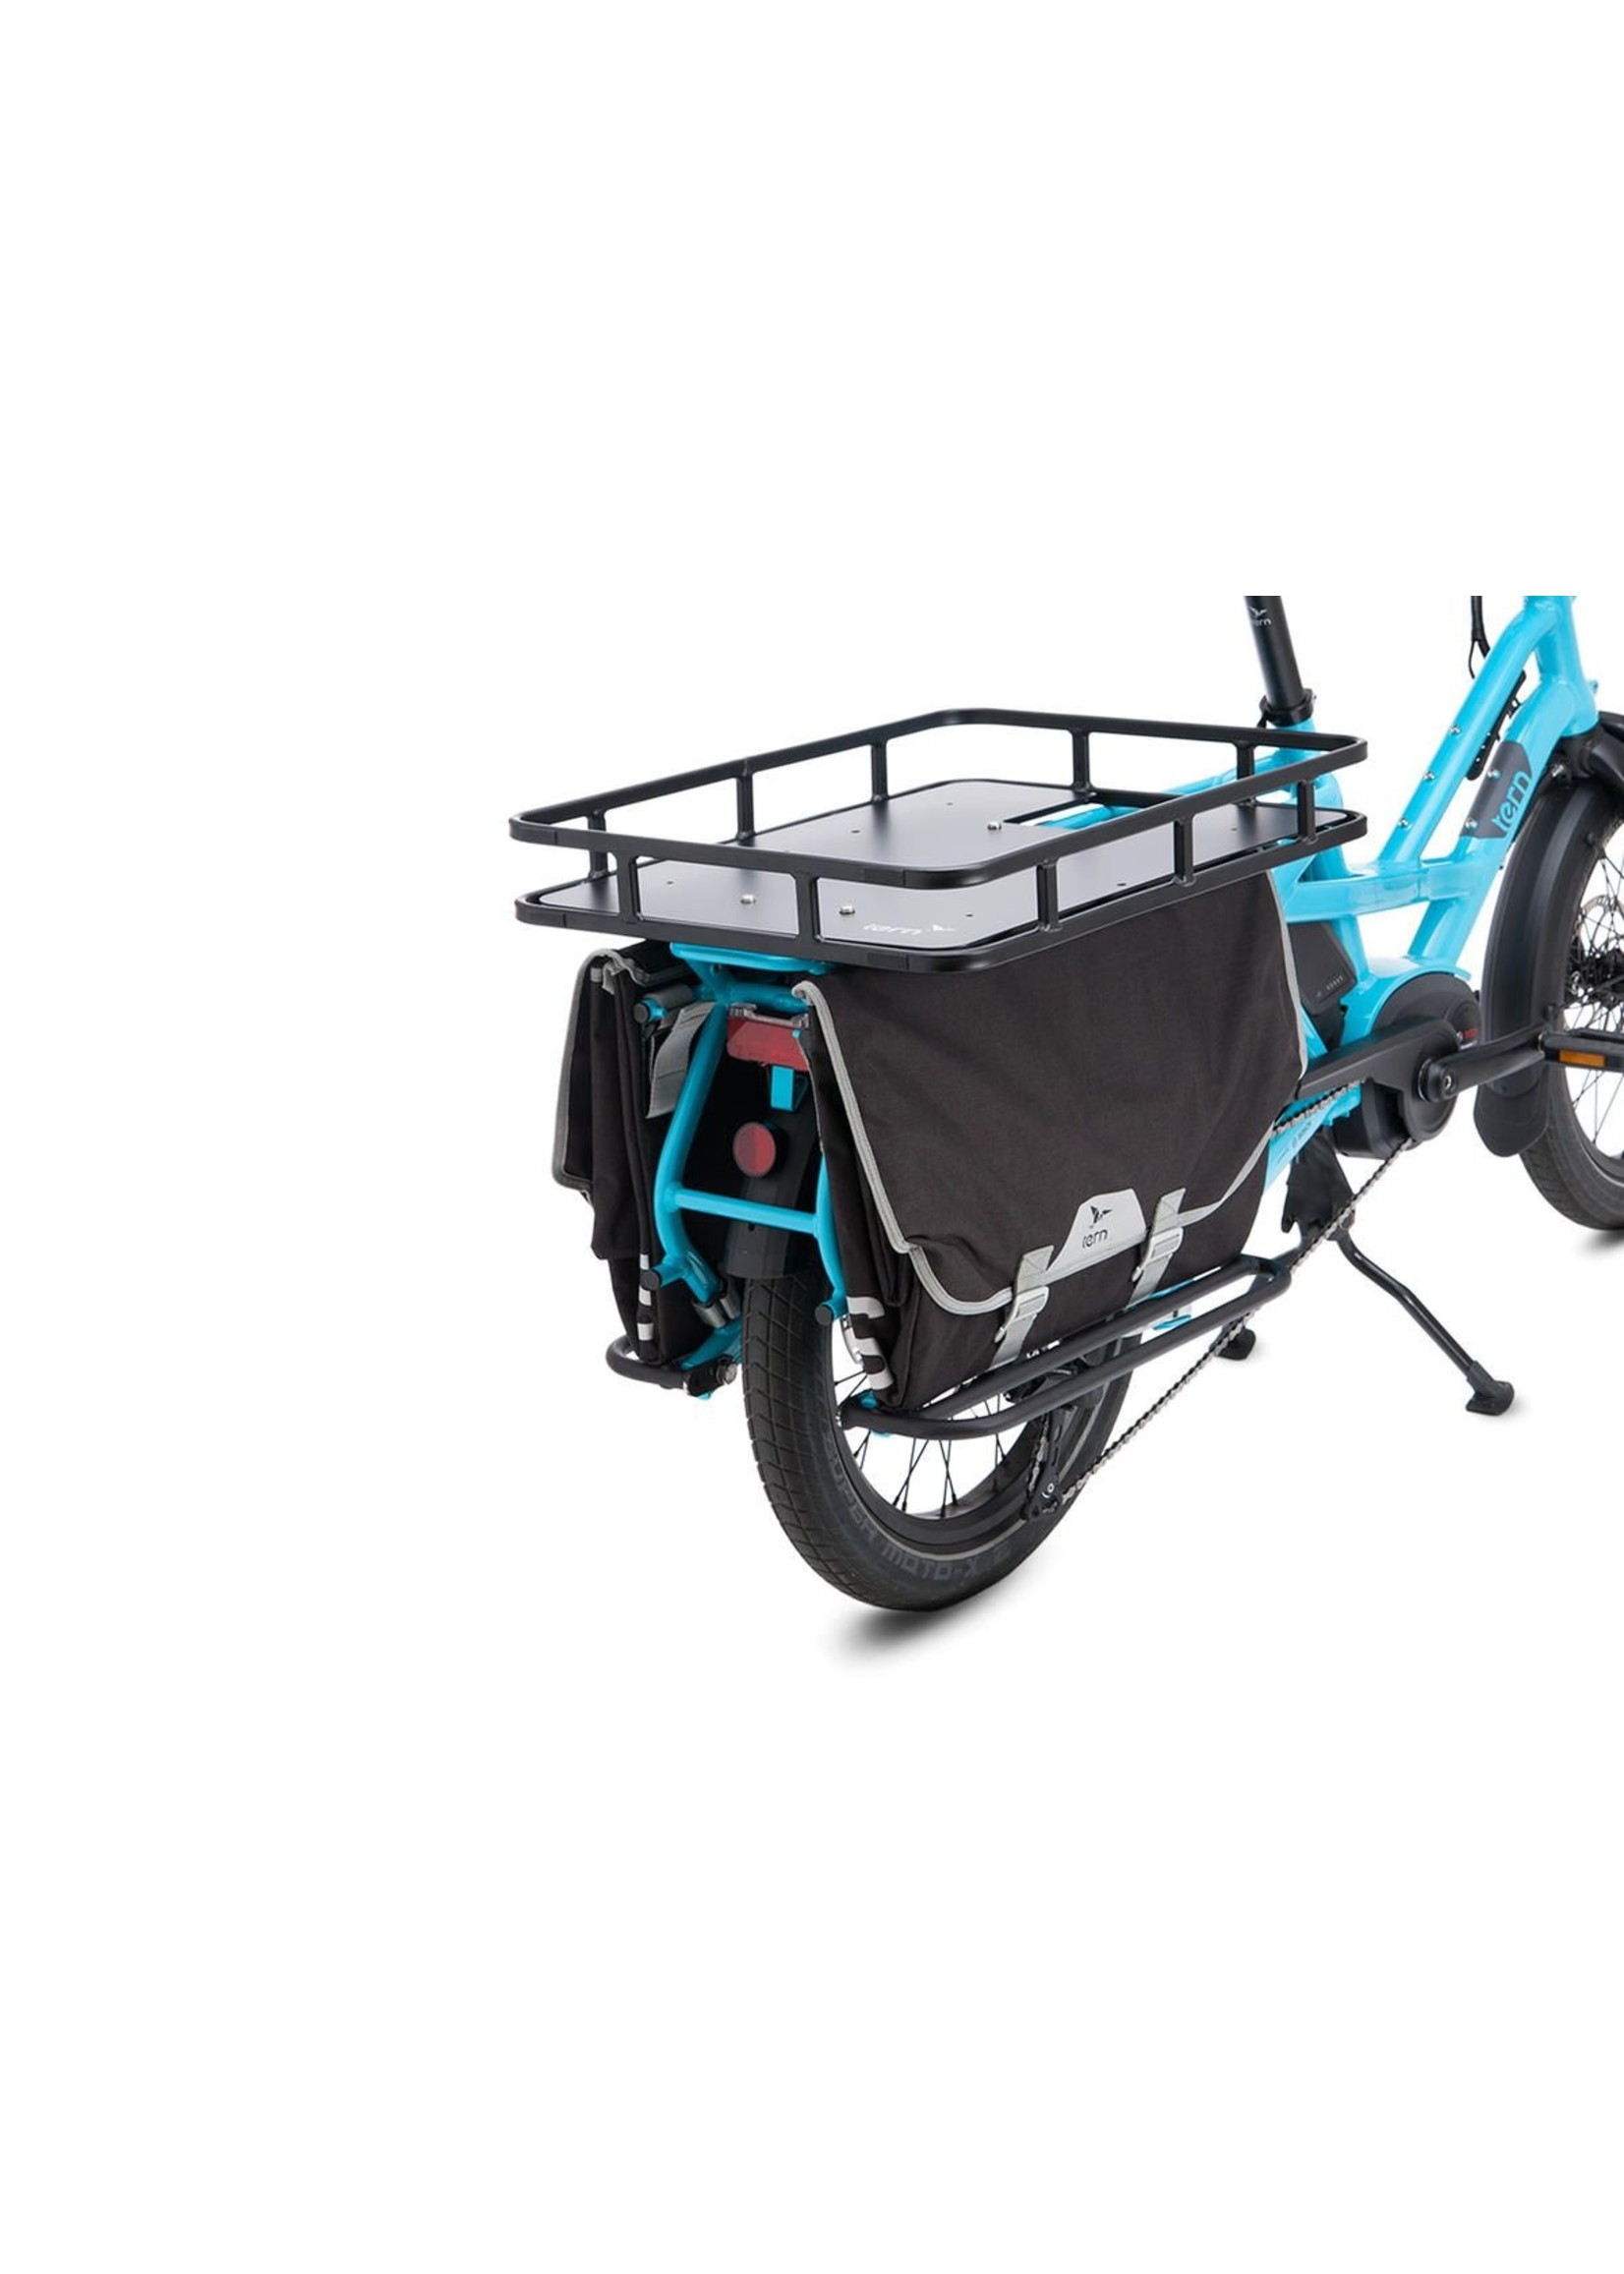 Tern eBikes Tern HSD & GSD Accessory Shortbed Tray Rear Cargo Carrier carries up to 35kg